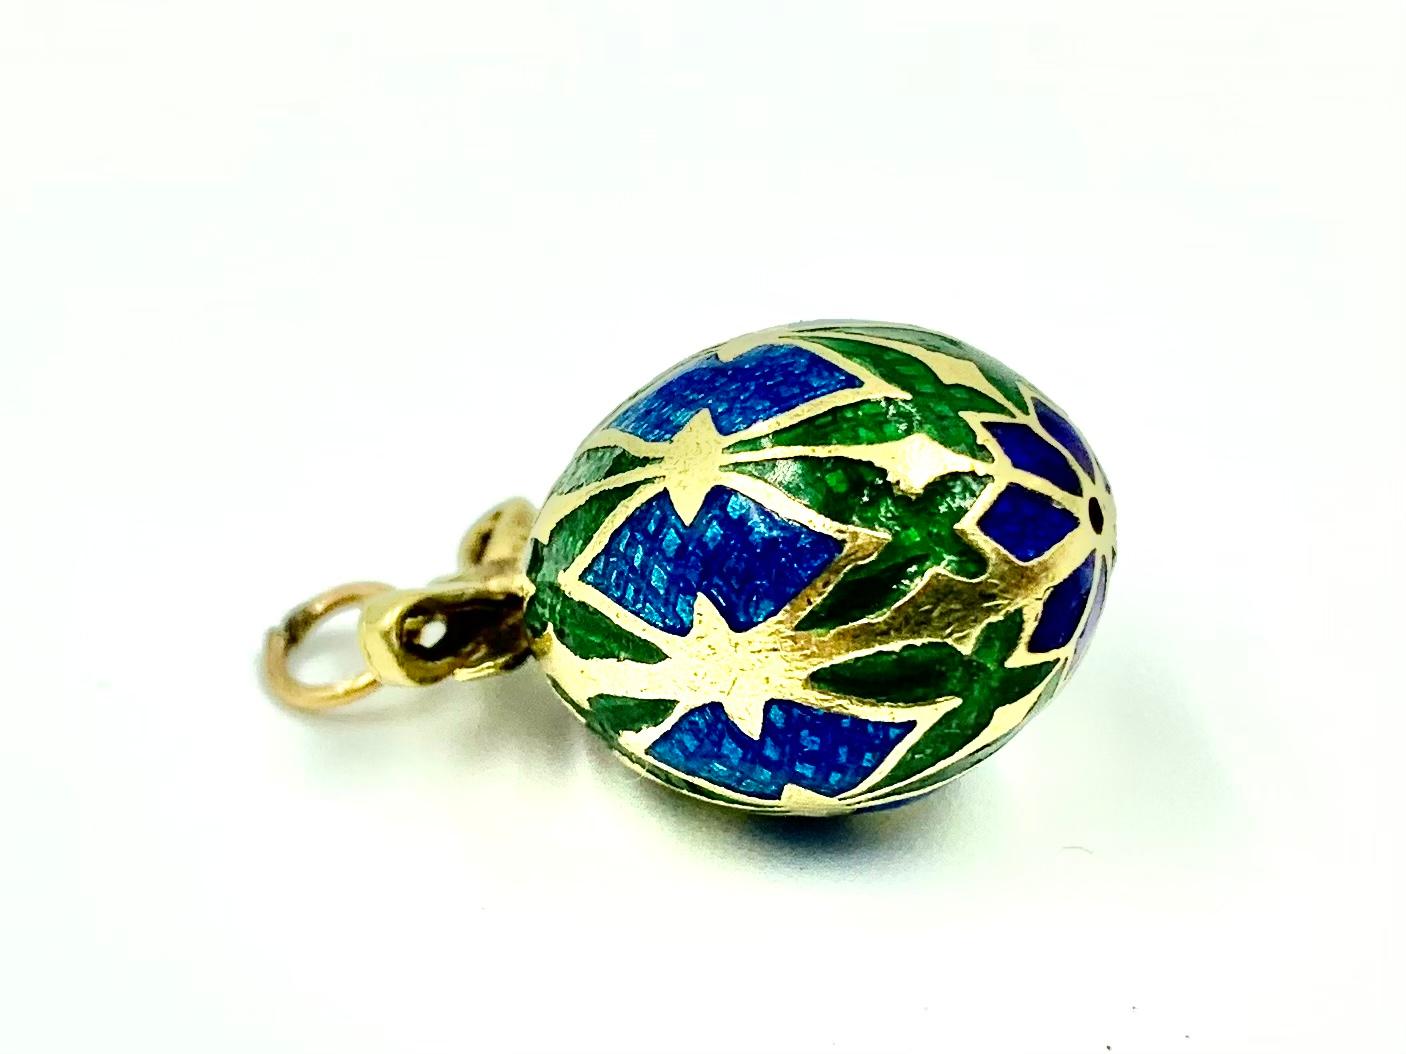 Antique Russian Gold and three color guilloche enamel Easter egg pendant. The geometric design of this beautiful pendant focuses on the number 8, a number associated with infinity, spiritual balance and a symbol of new beginnings. At the top and